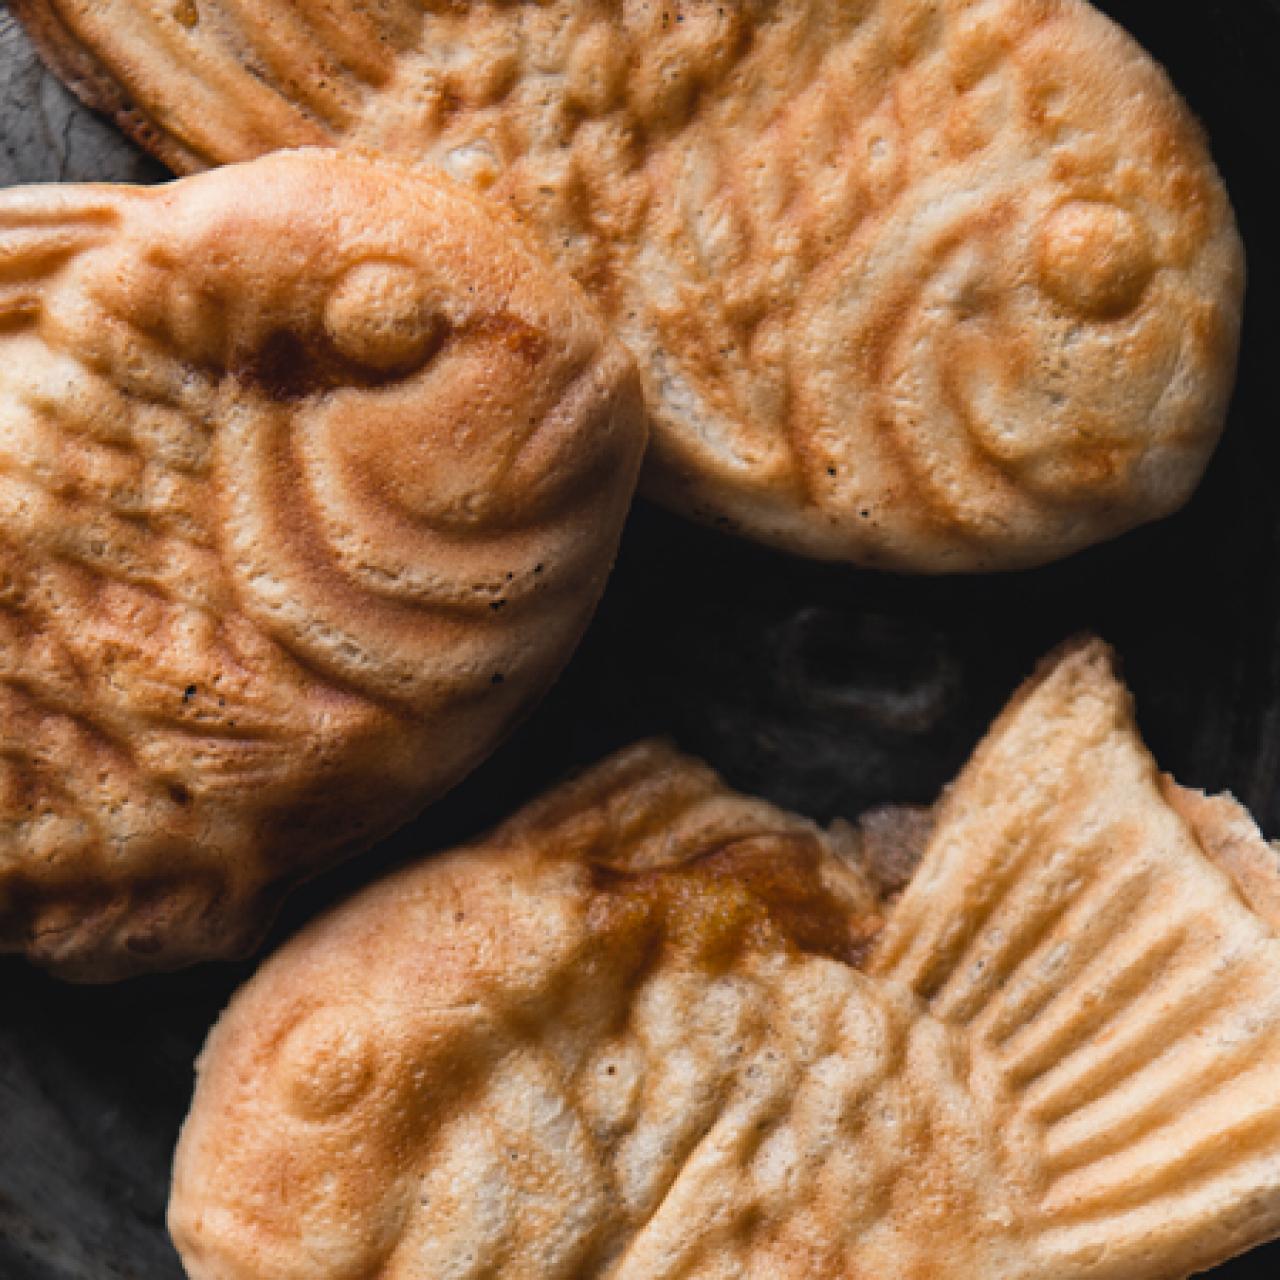 How to Make Taiyaki at Home, According to Two Japanese Dessert